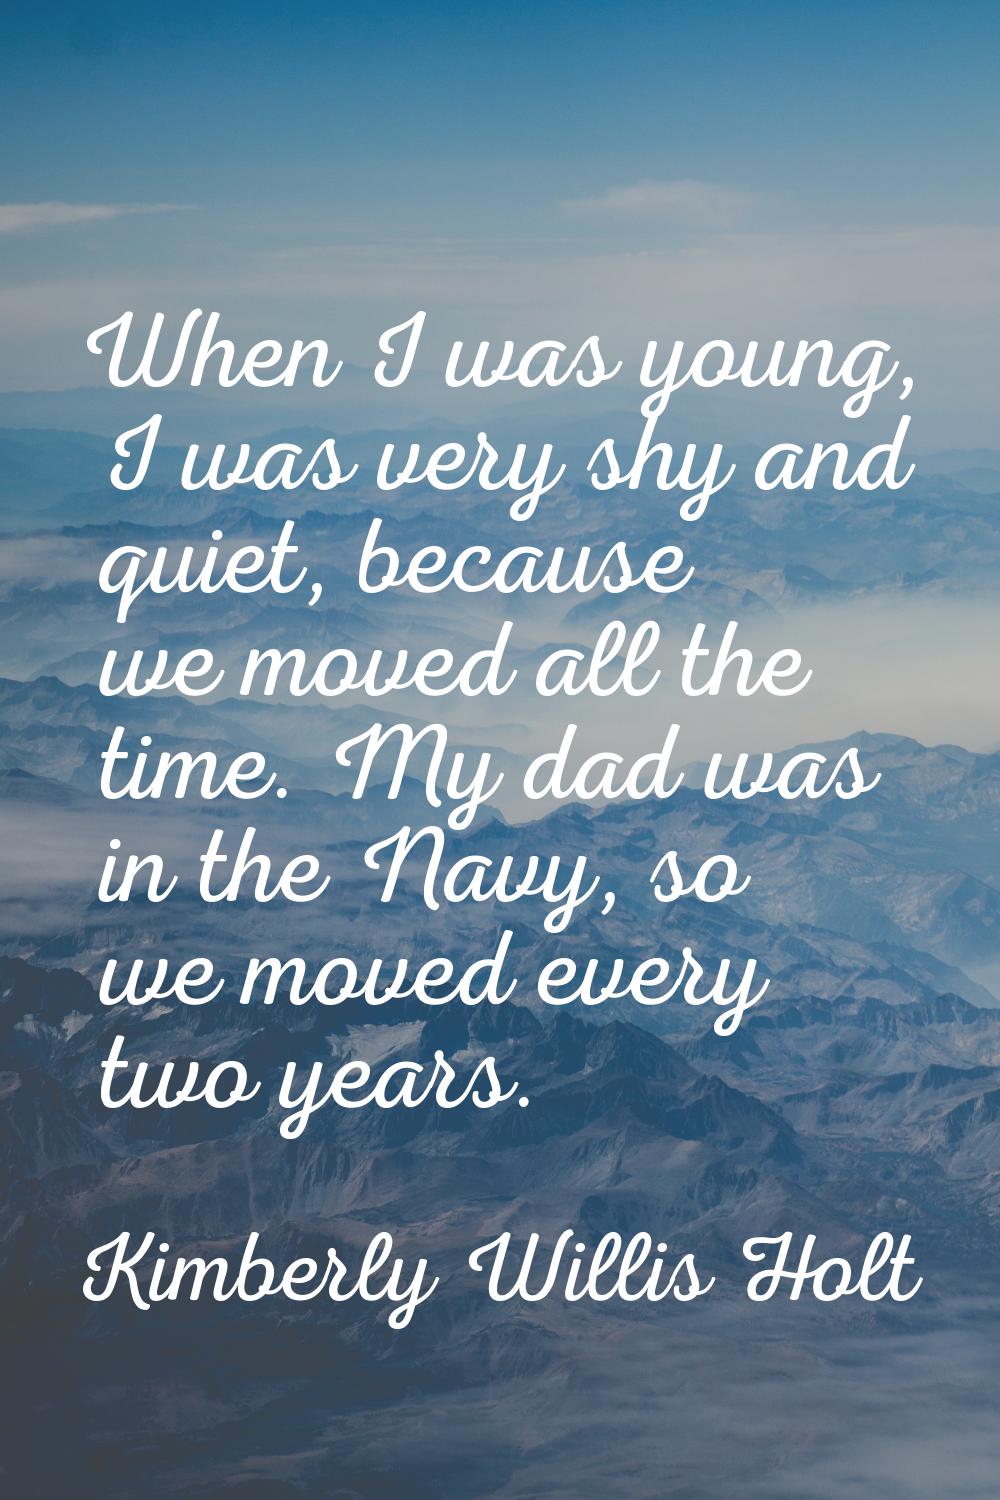 When I was young, I was very shy and quiet, because we moved all the time. My dad was in the Navy, 